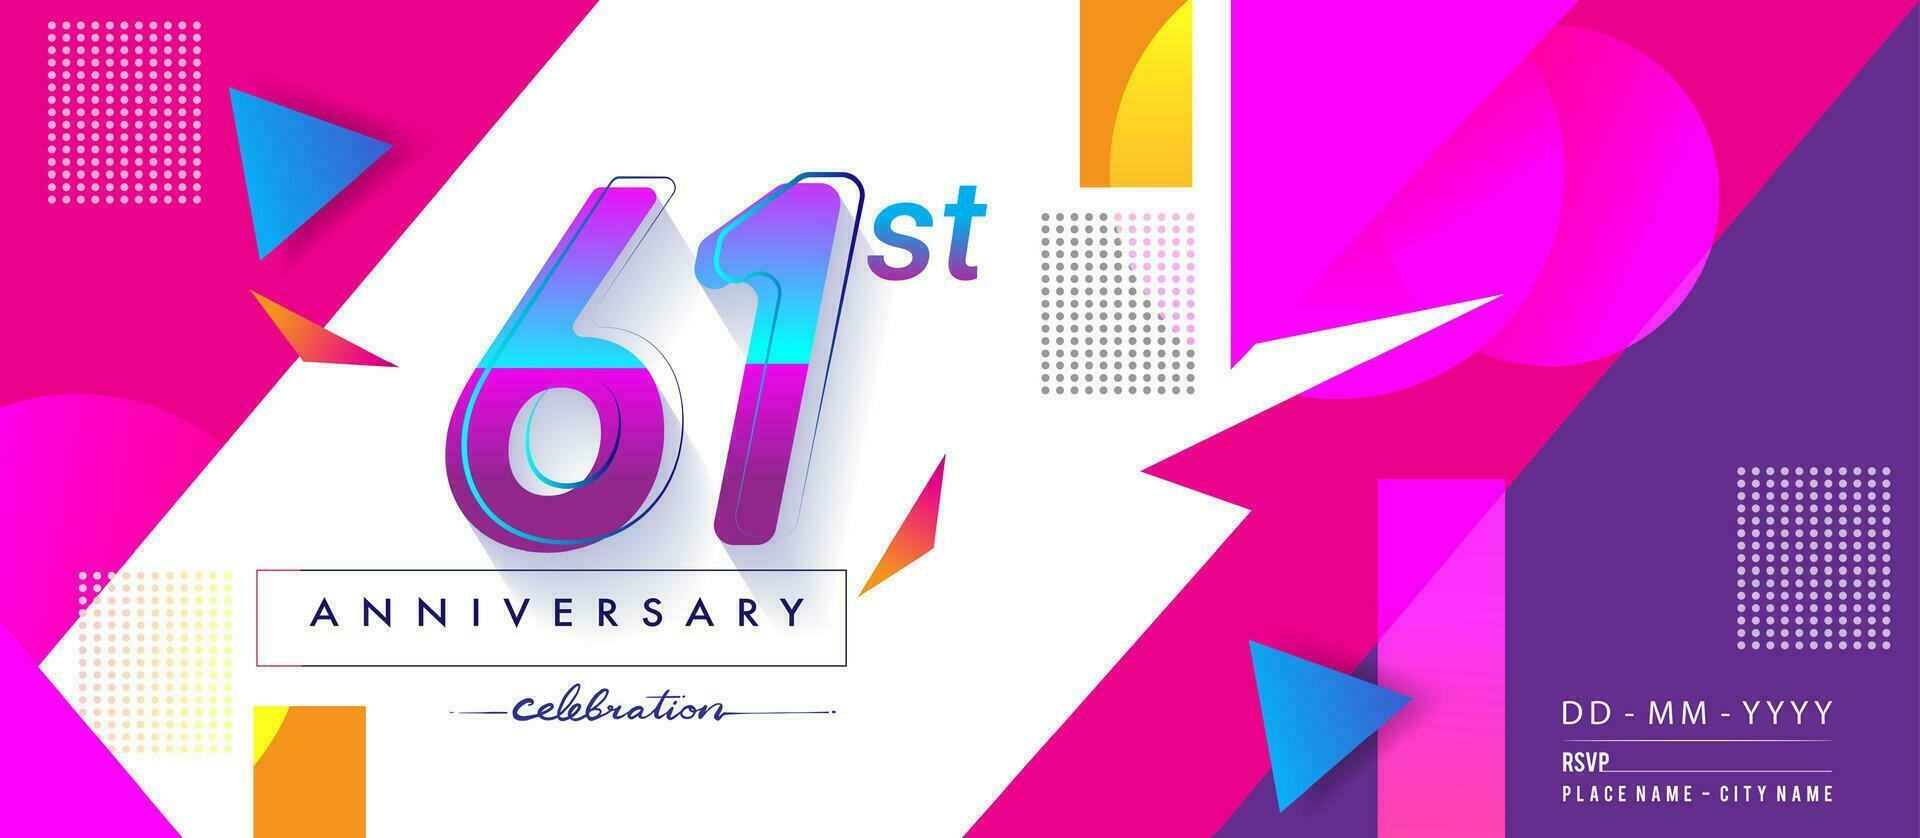 61st years anniversary logo, vector design birthday celebration with colorful geometric background and circles shape.